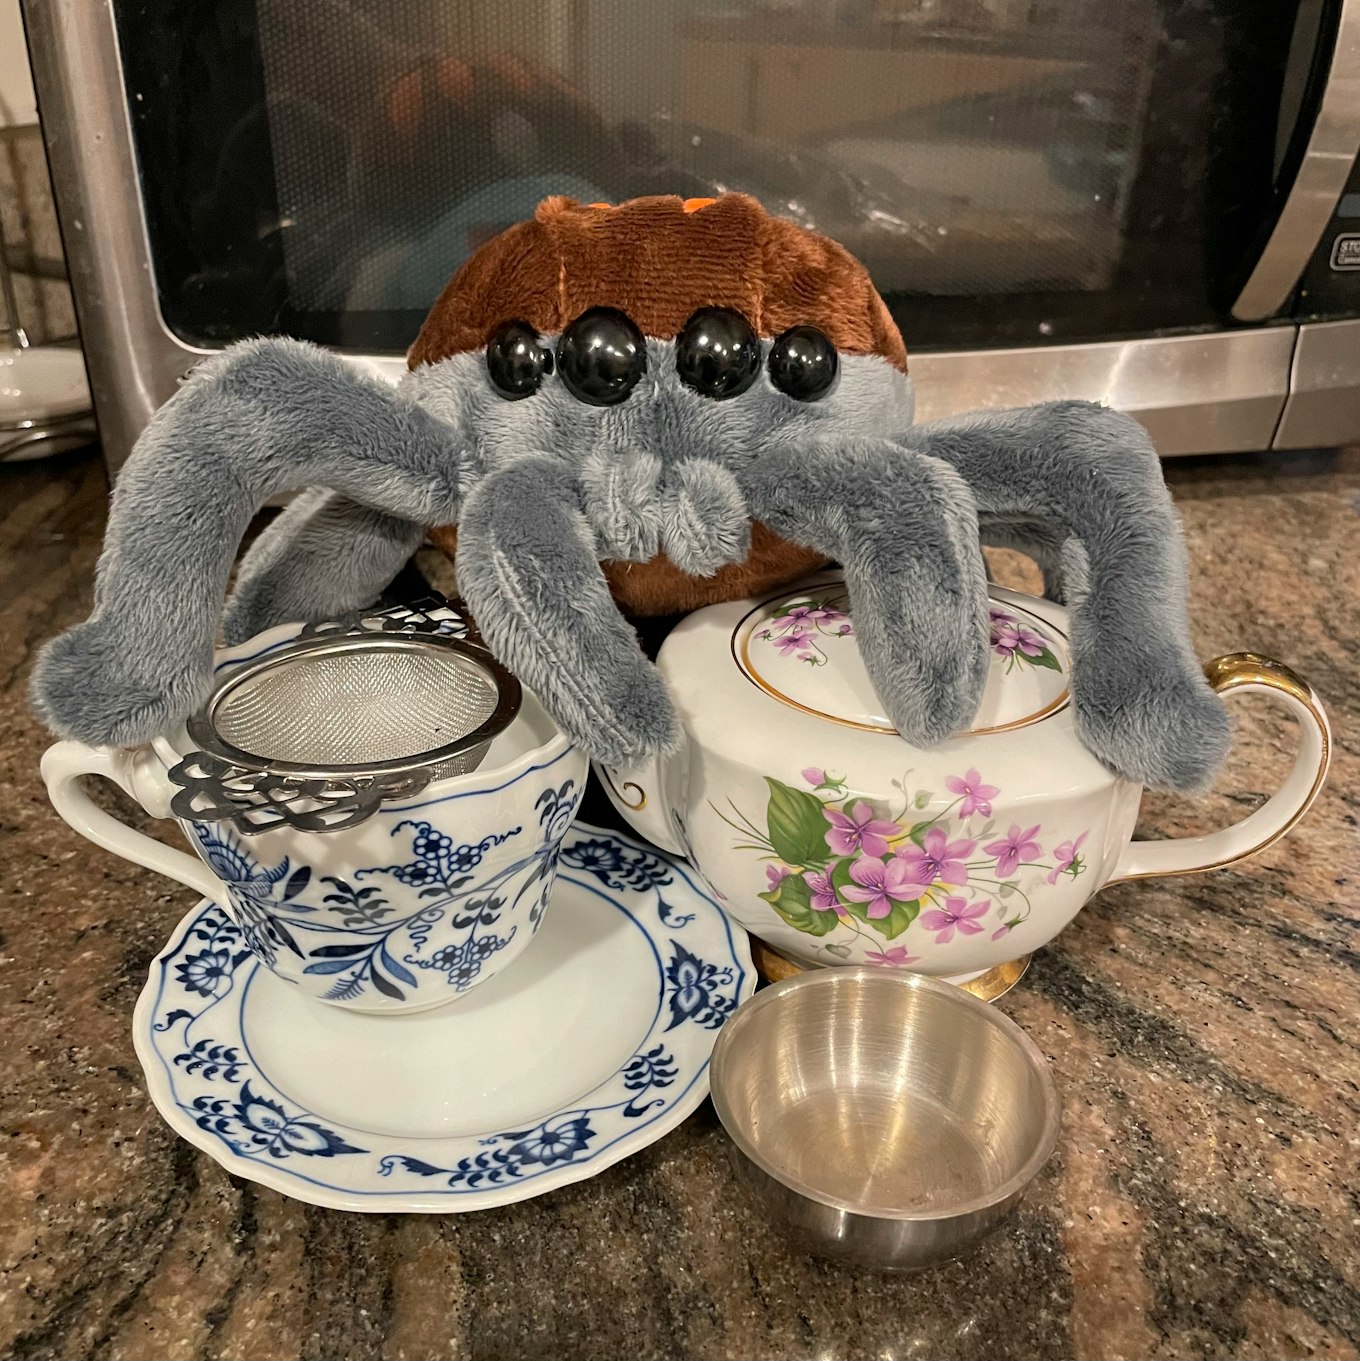 A plush spider sitting over a tea cup and teapot 